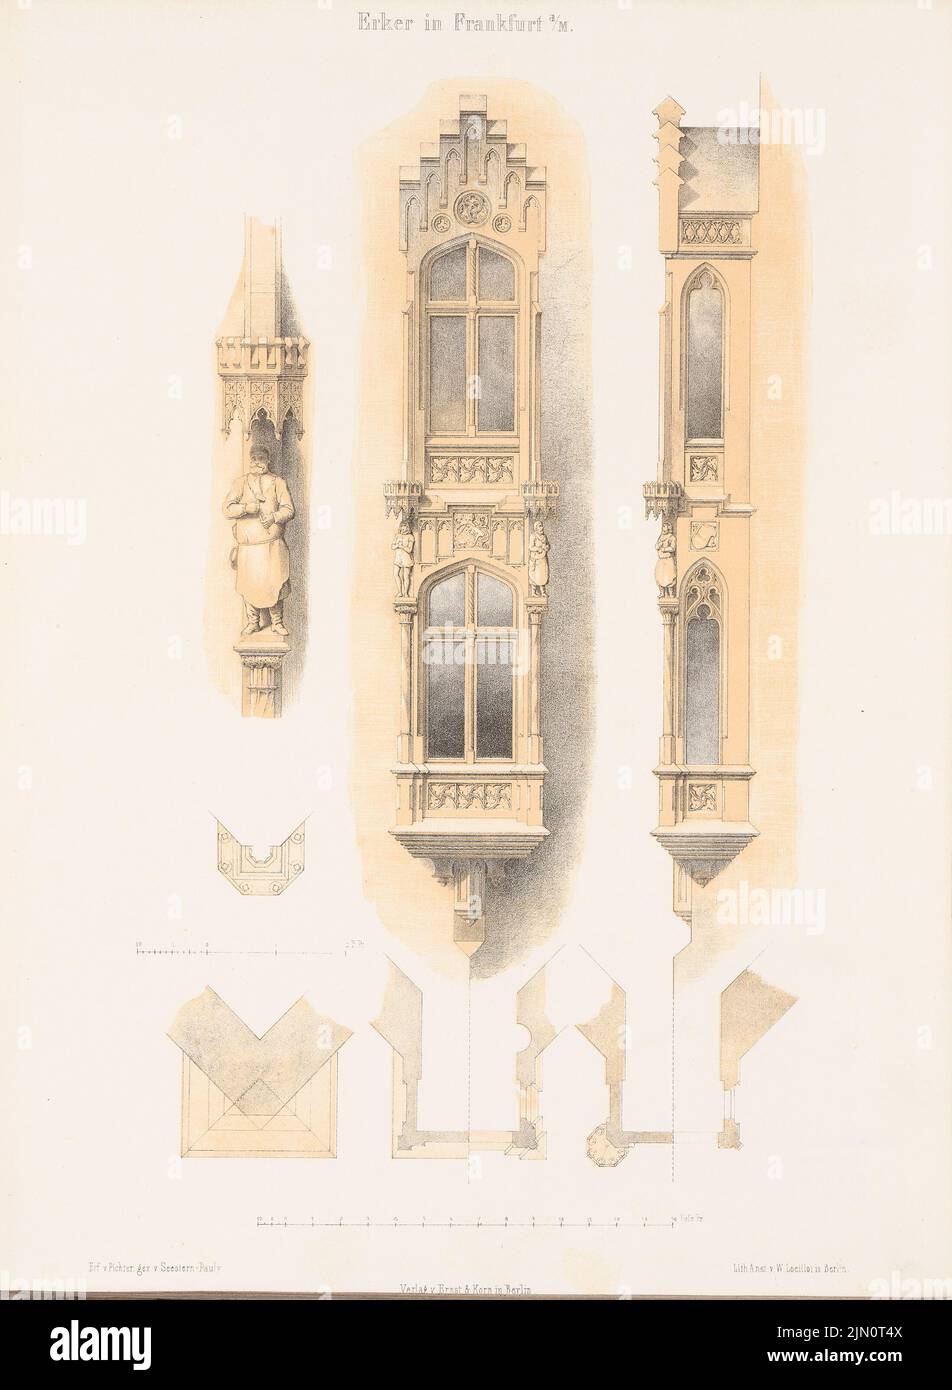 Pichter, Erker, Frankfurt/Main. (From: Architectural sketchbook, H. 29, 1857.) (1857-1857): View, side view, cuts, detail. Lithography colored on paper, 67 x 49.1 cm (including scan edges) Pichter : Erker, Frankfurt/Main. (Aus: Architektonisches Skizzenbuch, H. 29, 1857) Stock Photo